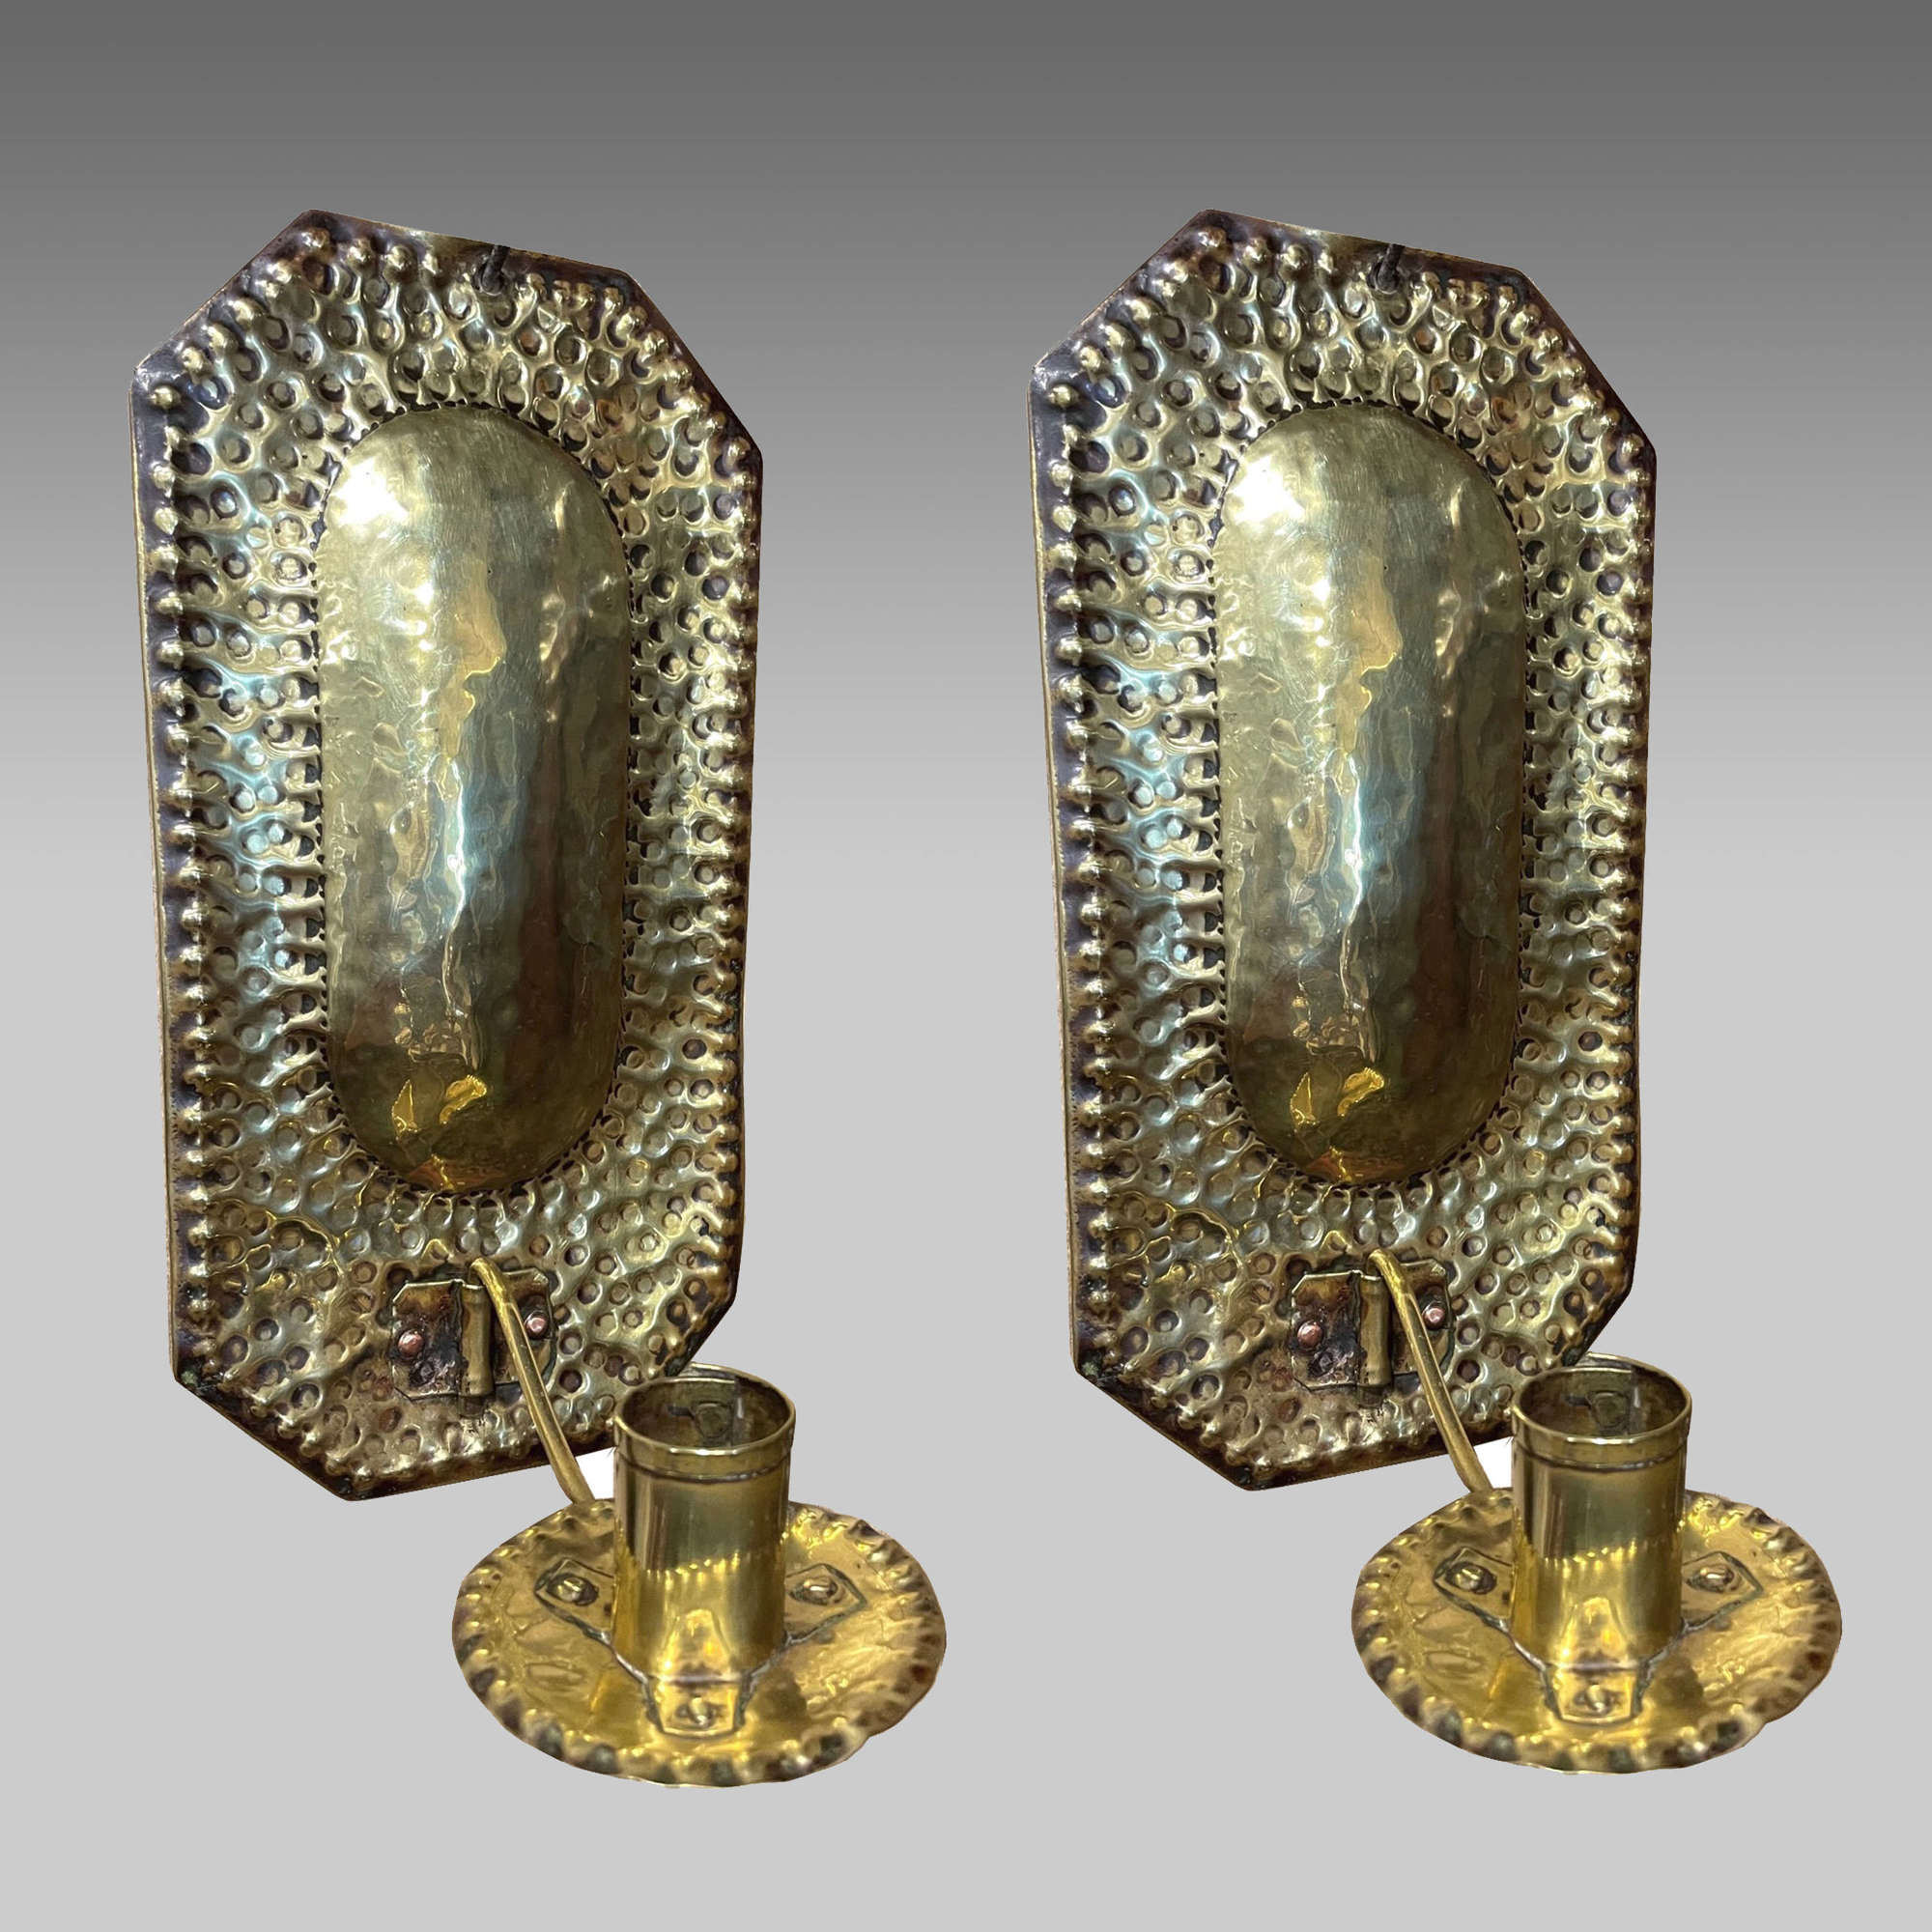 Pair 18th century wall sconces